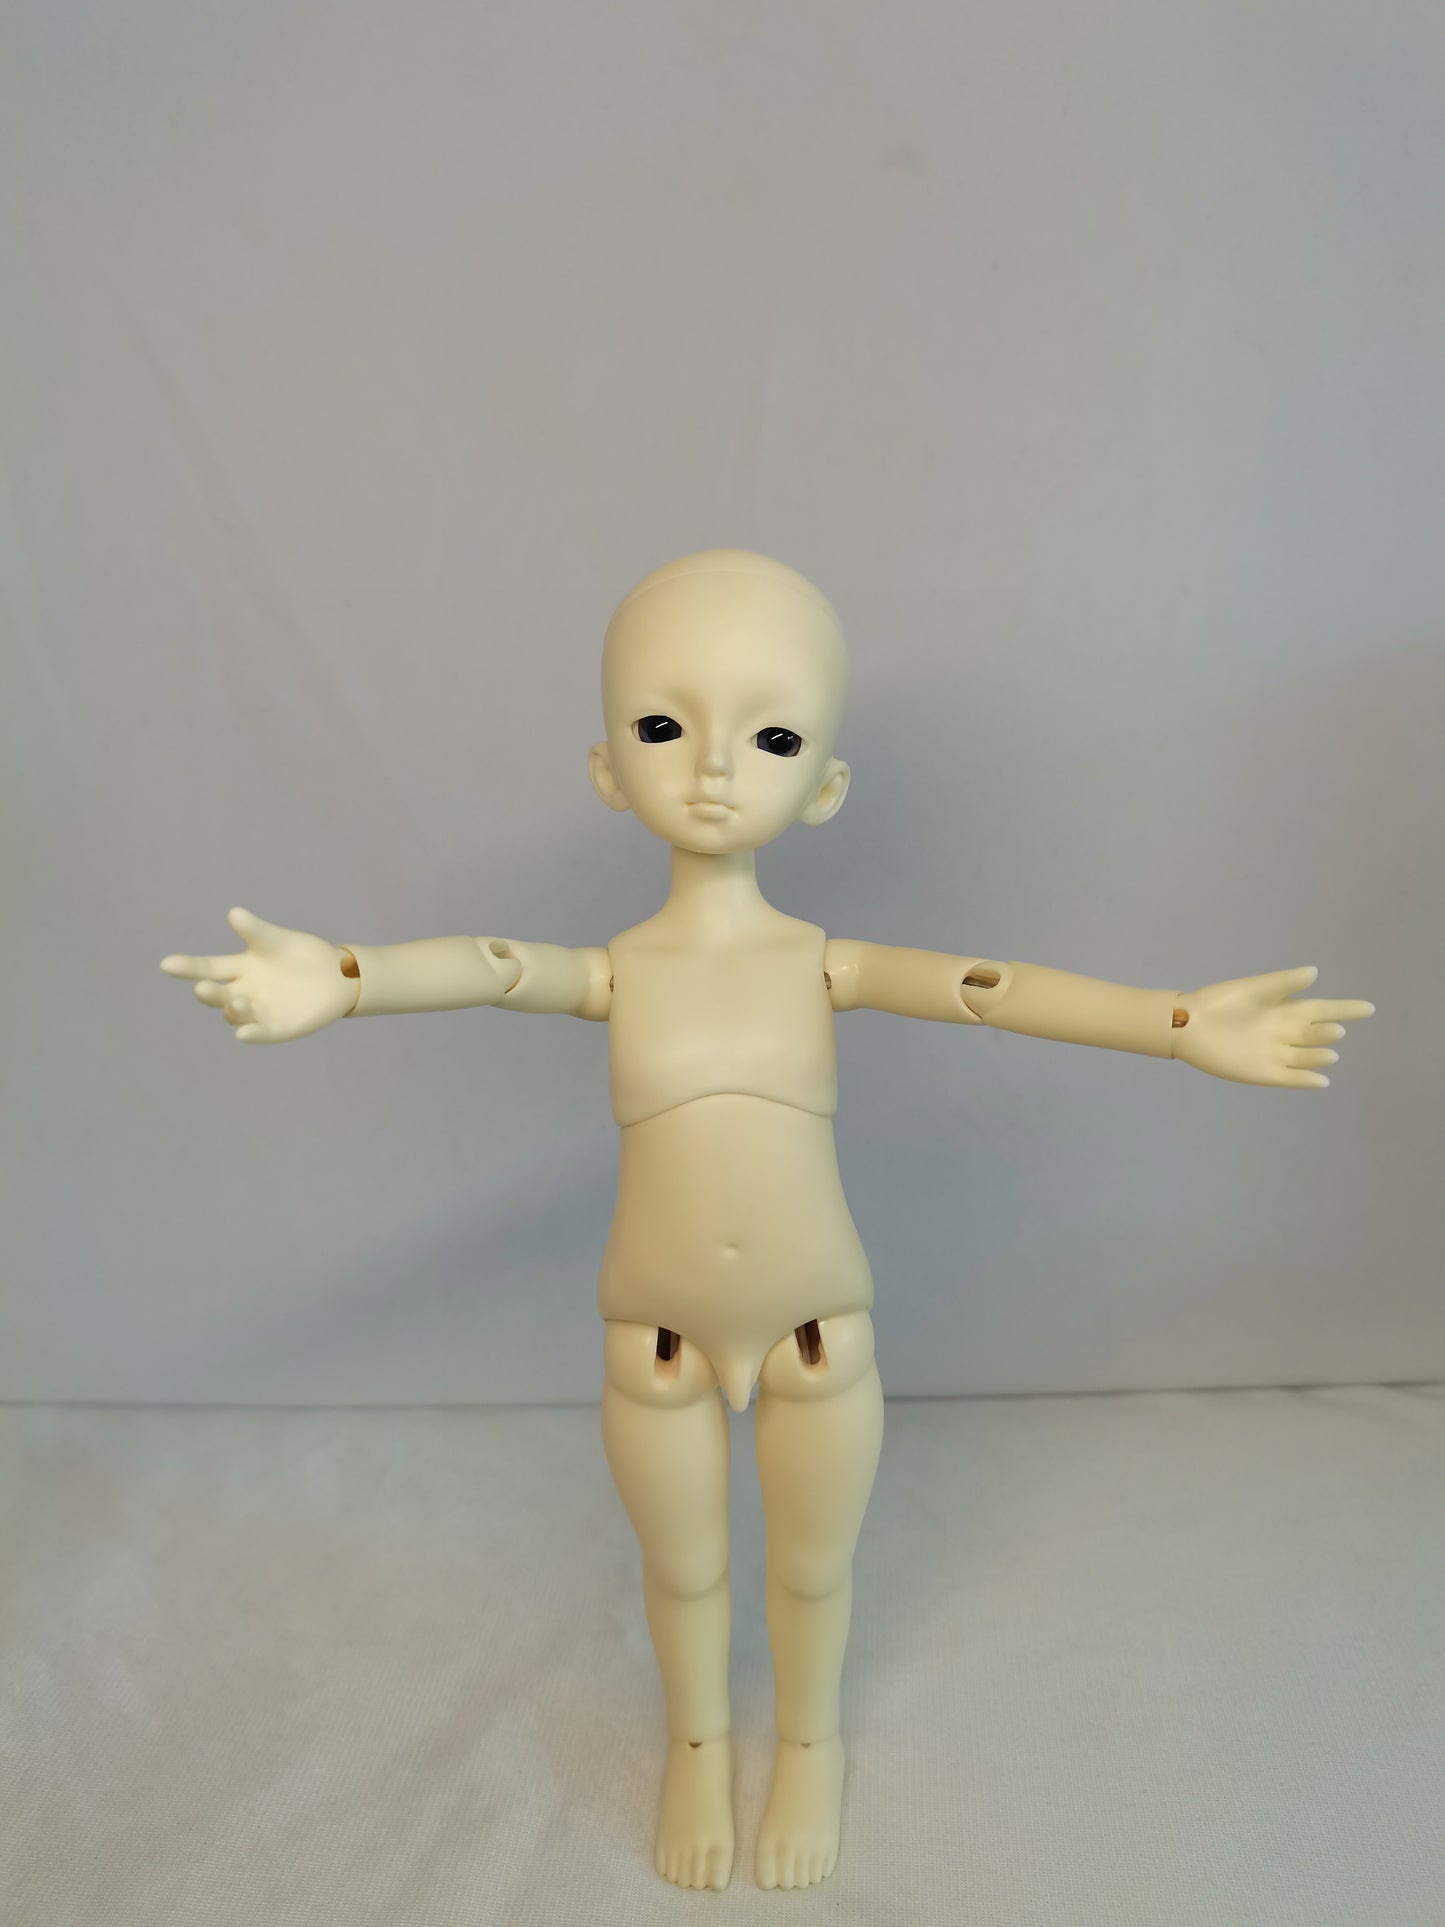 1/6 26cm doll in white skin with glass eyes